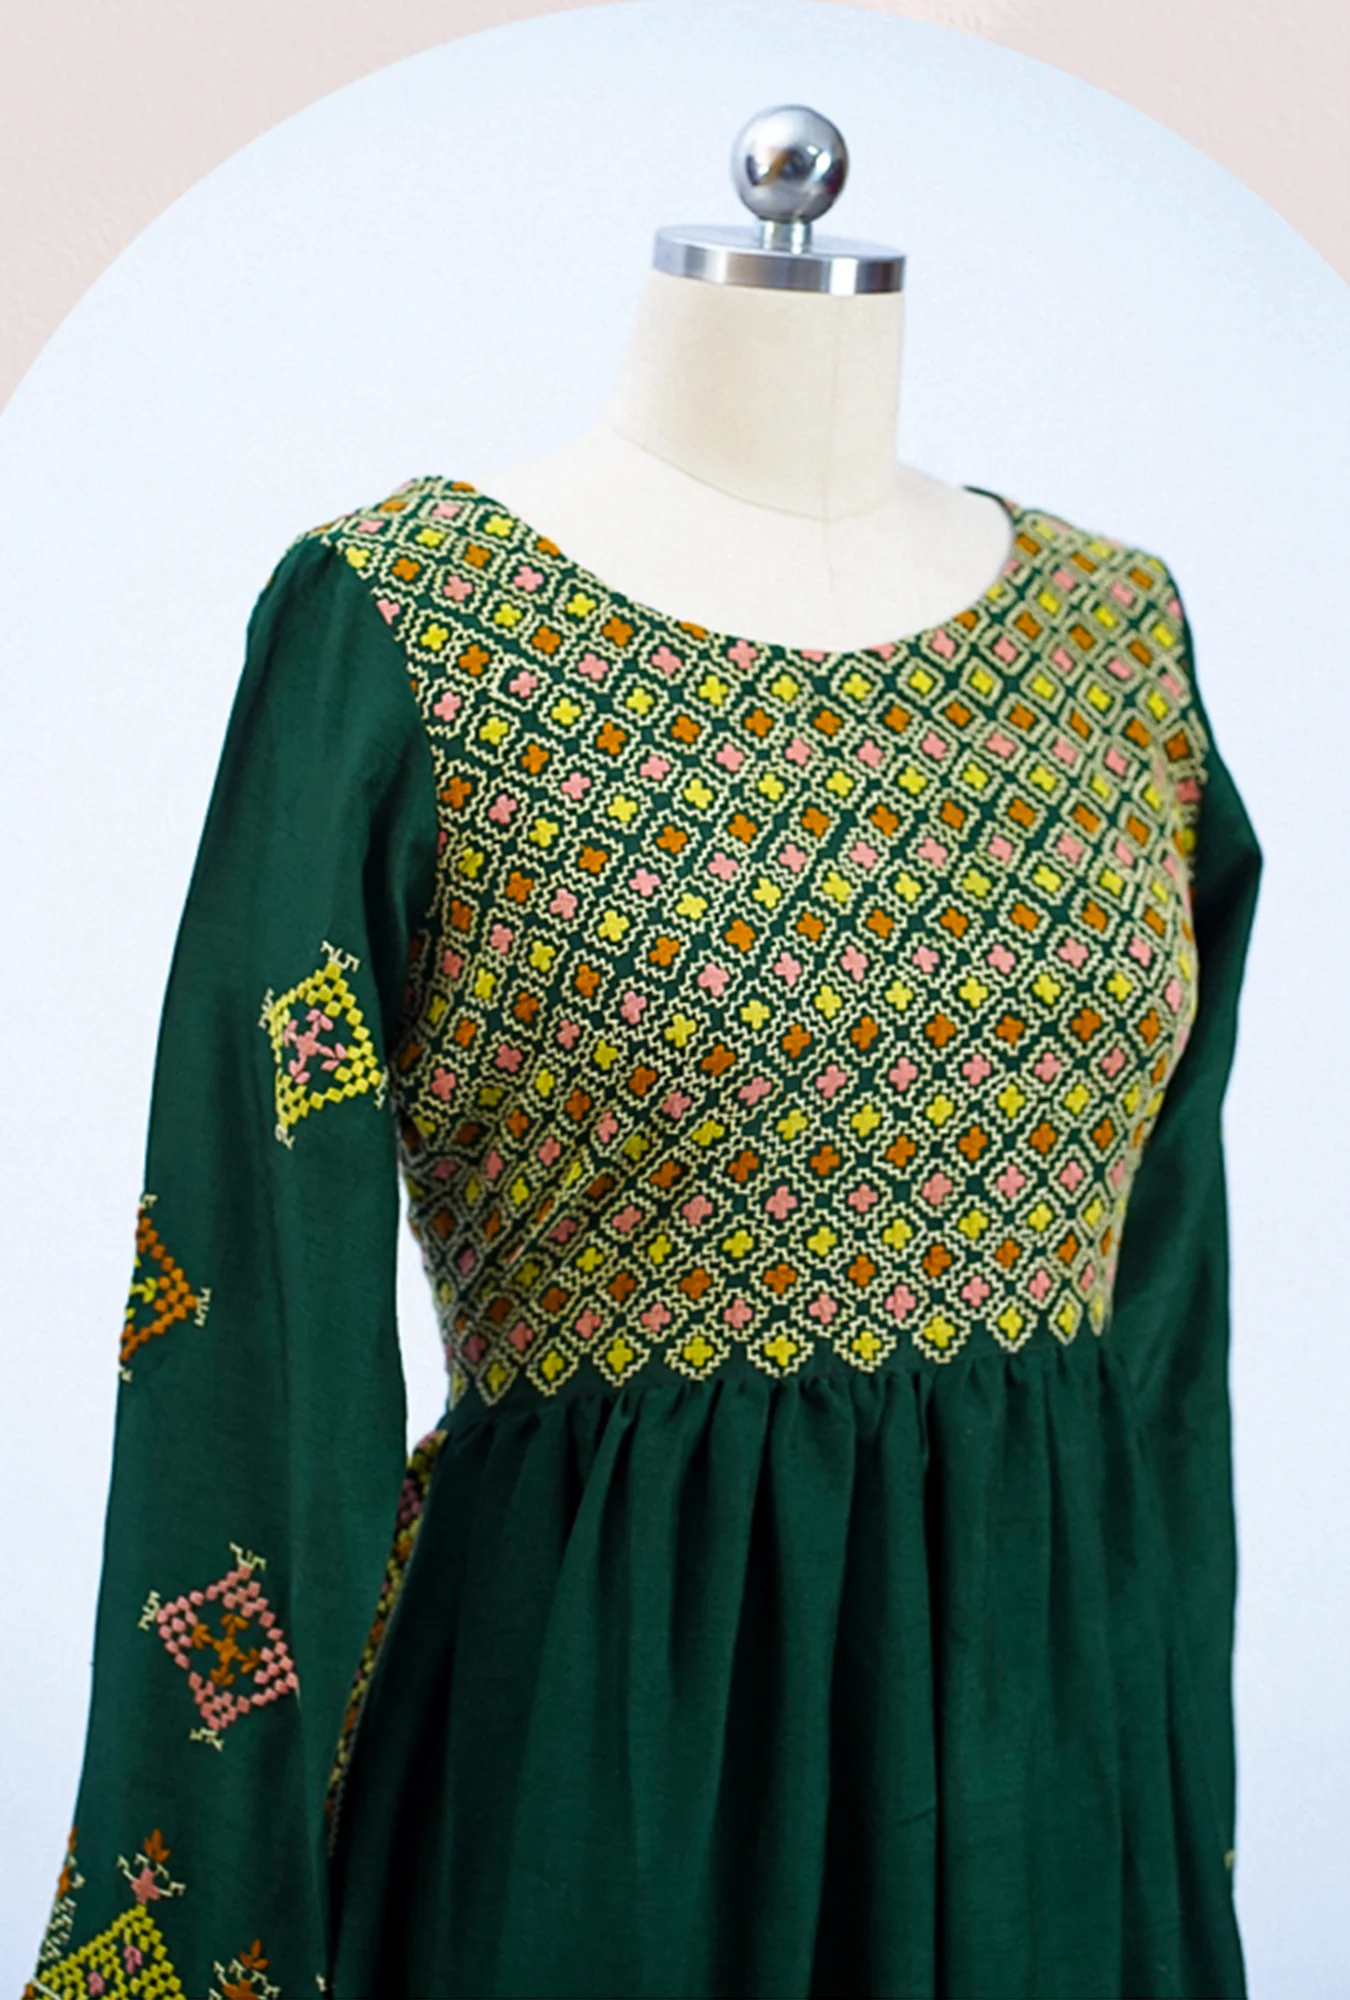 Long frock with Pakistani embroidery